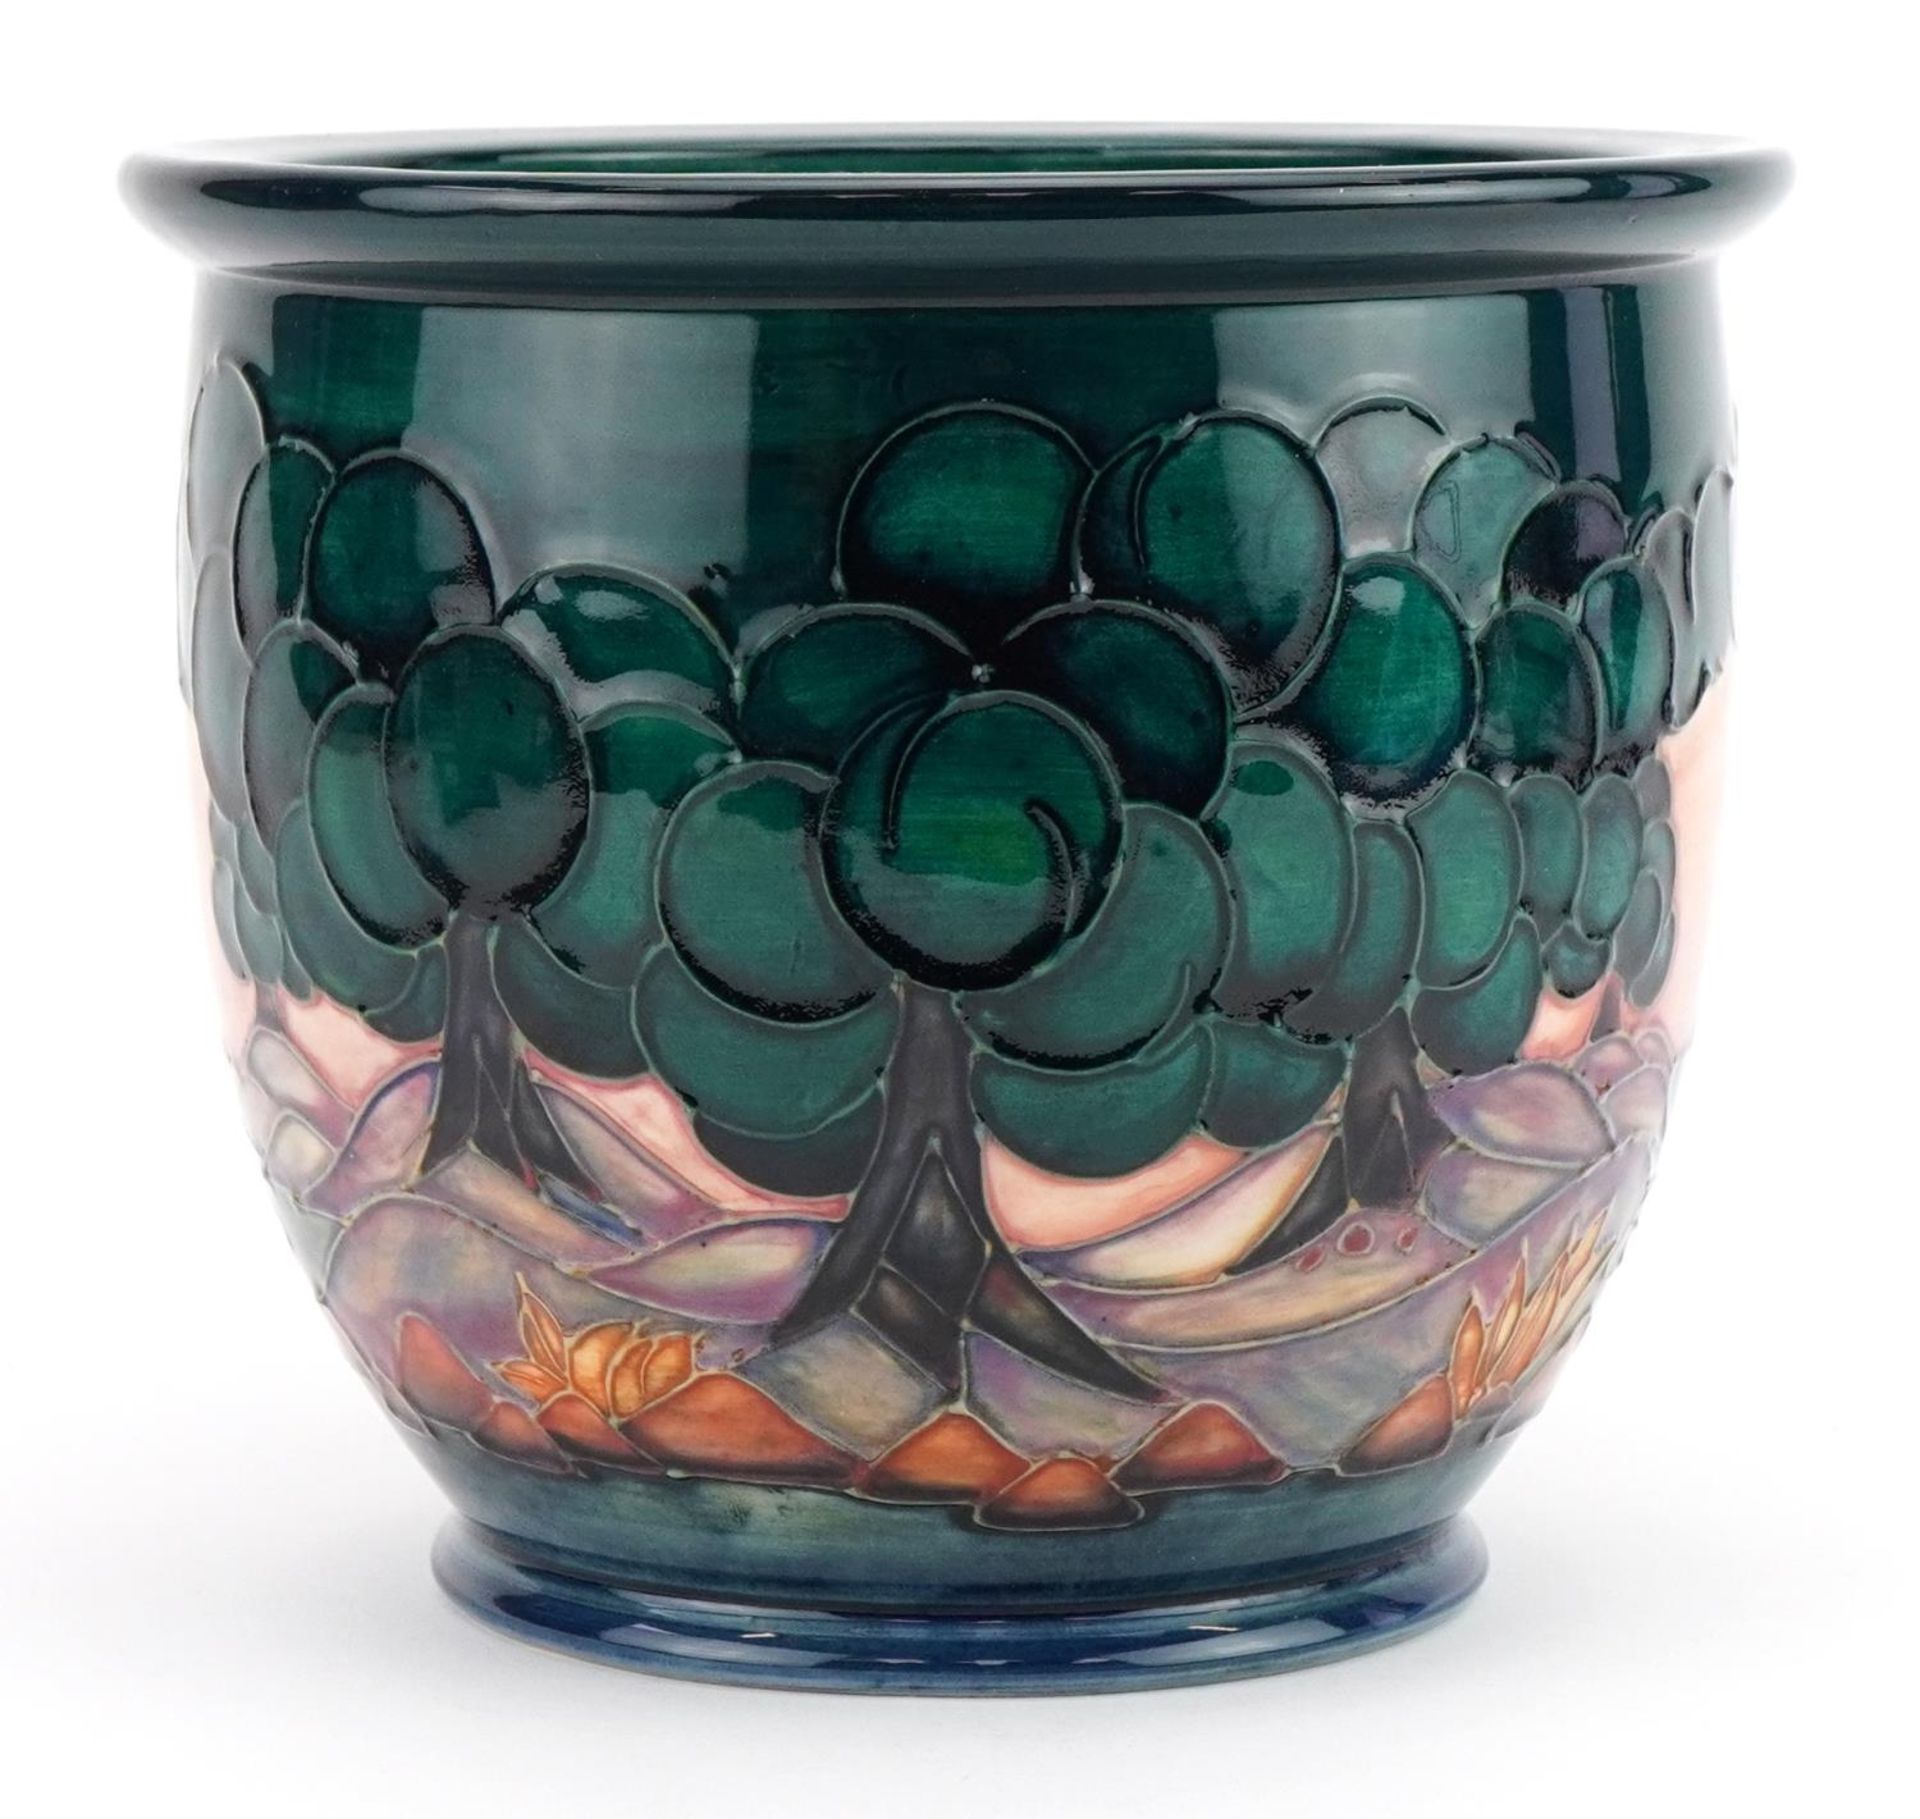 Moorcroft pottery jardiniere hand painted in the Mamoura pattern, 16cm high